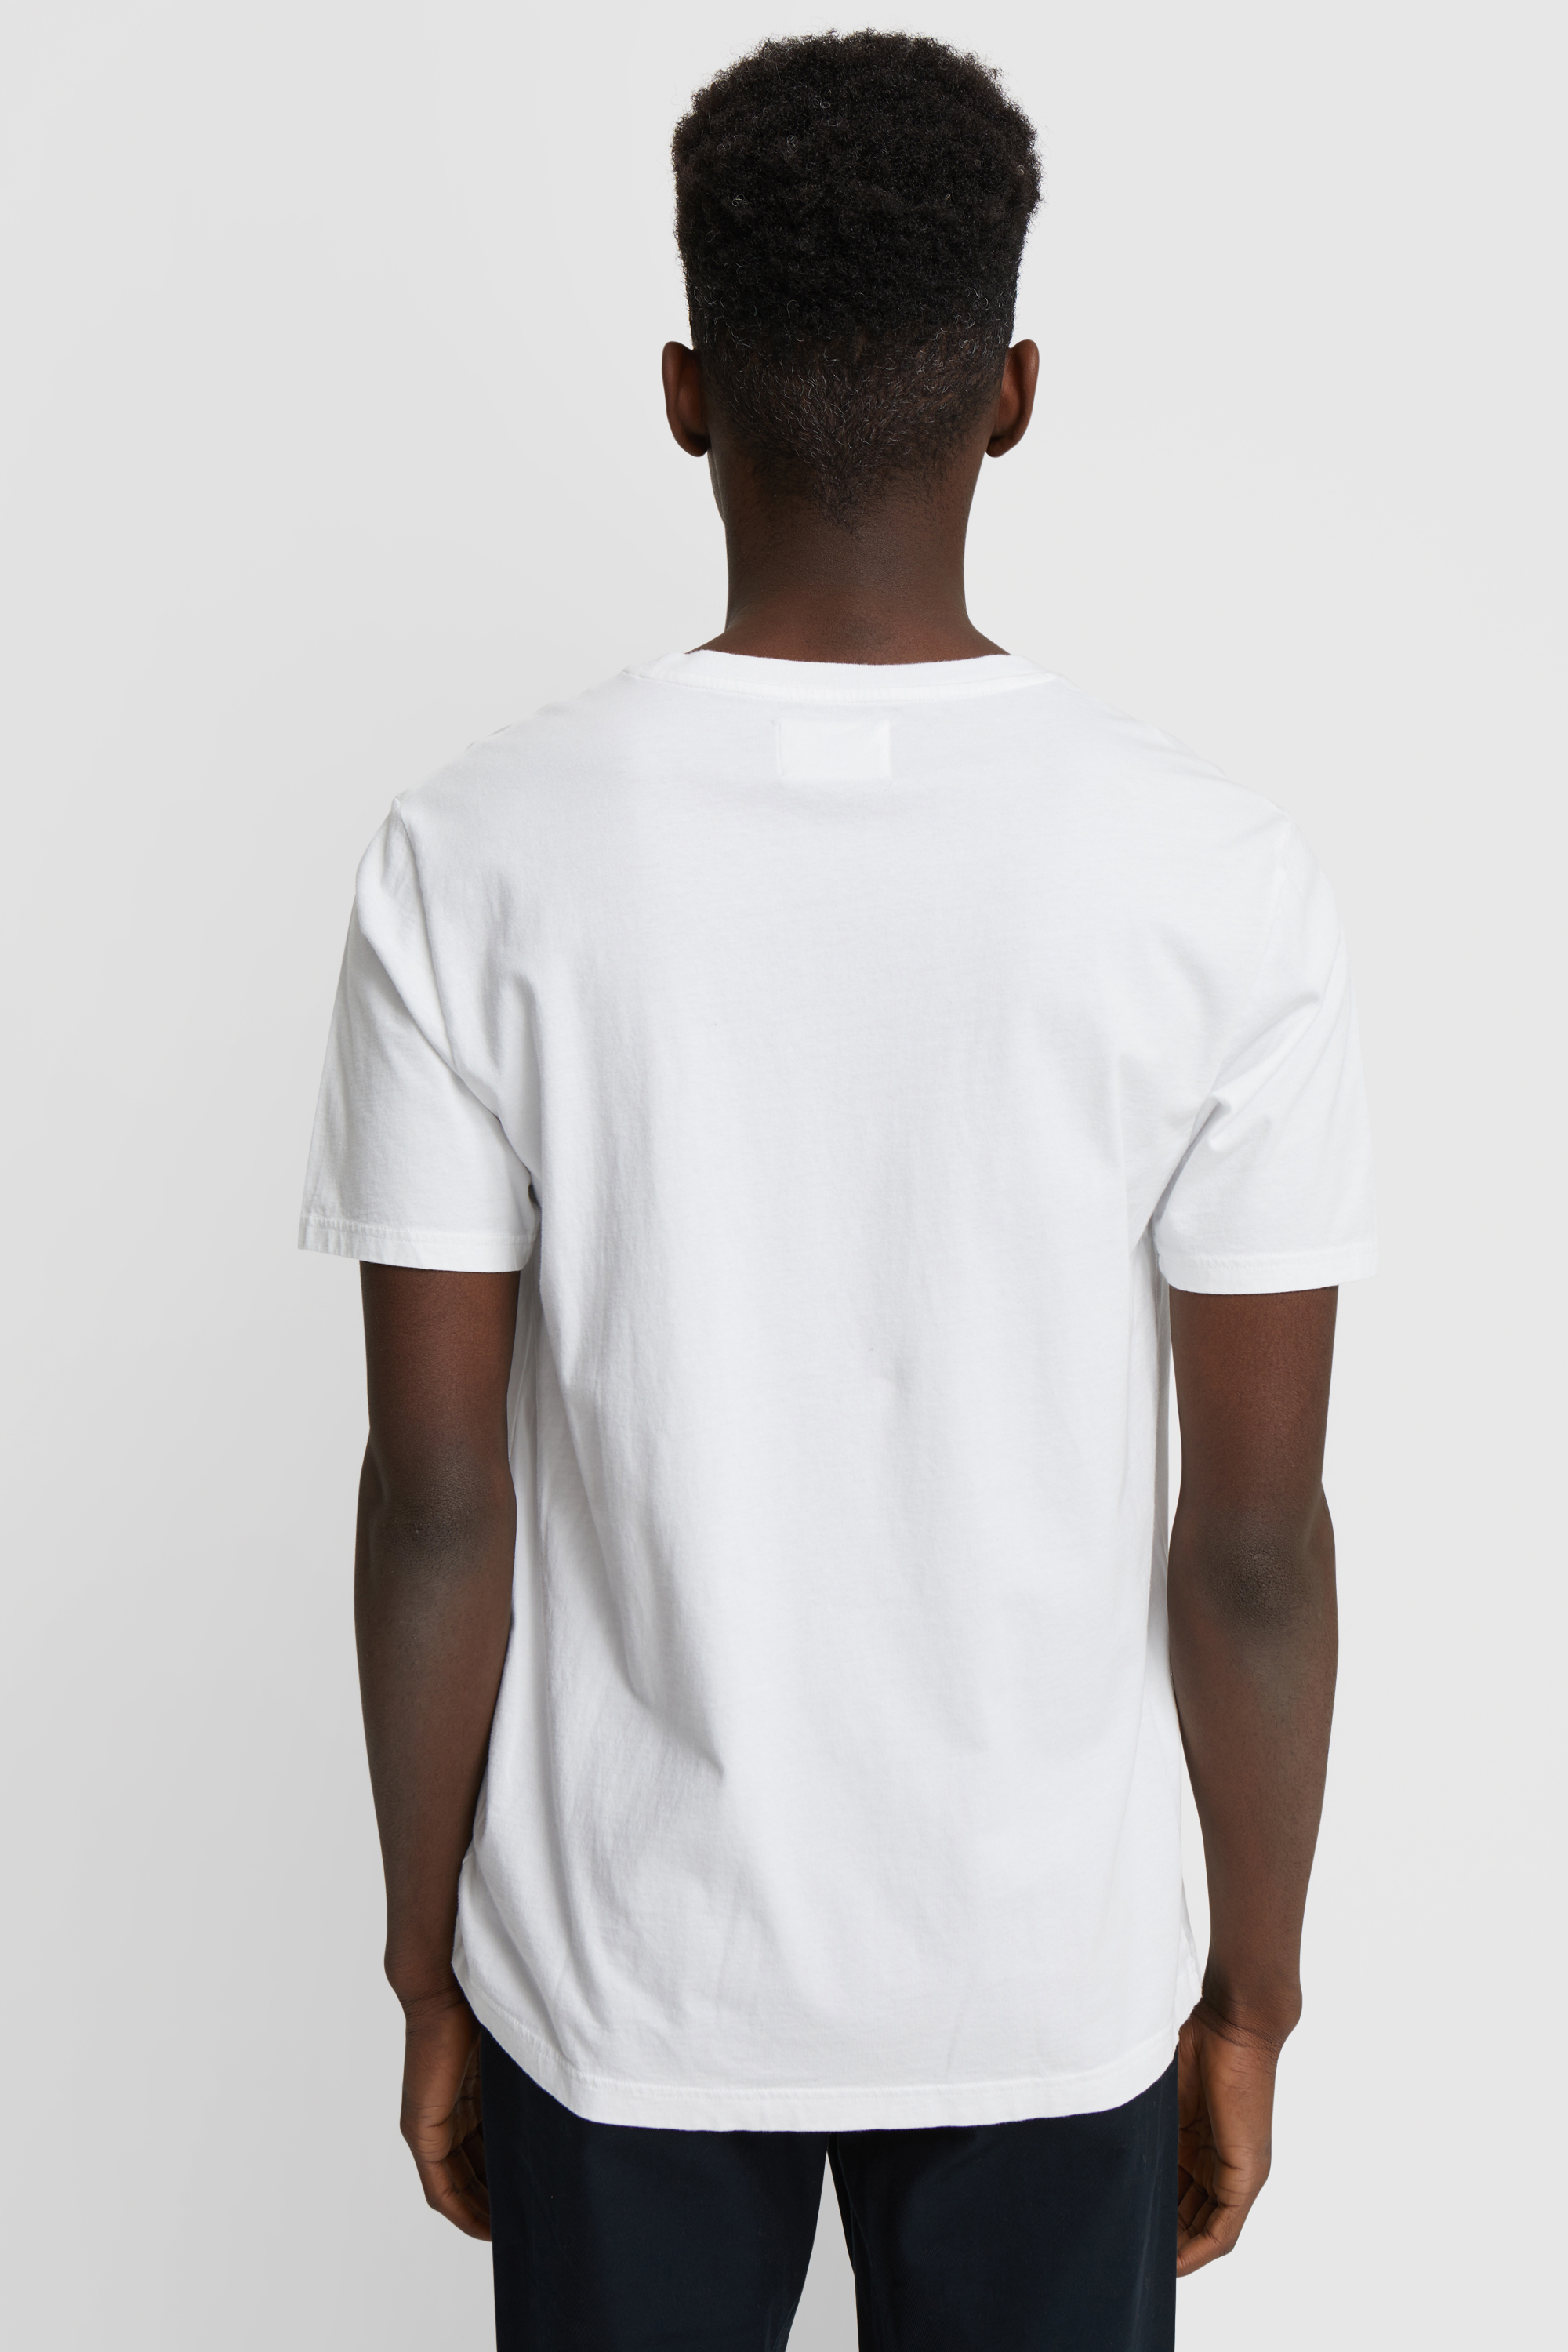 Double A by Wood Wood Ace T-shirt Bright white | WoodWood.com